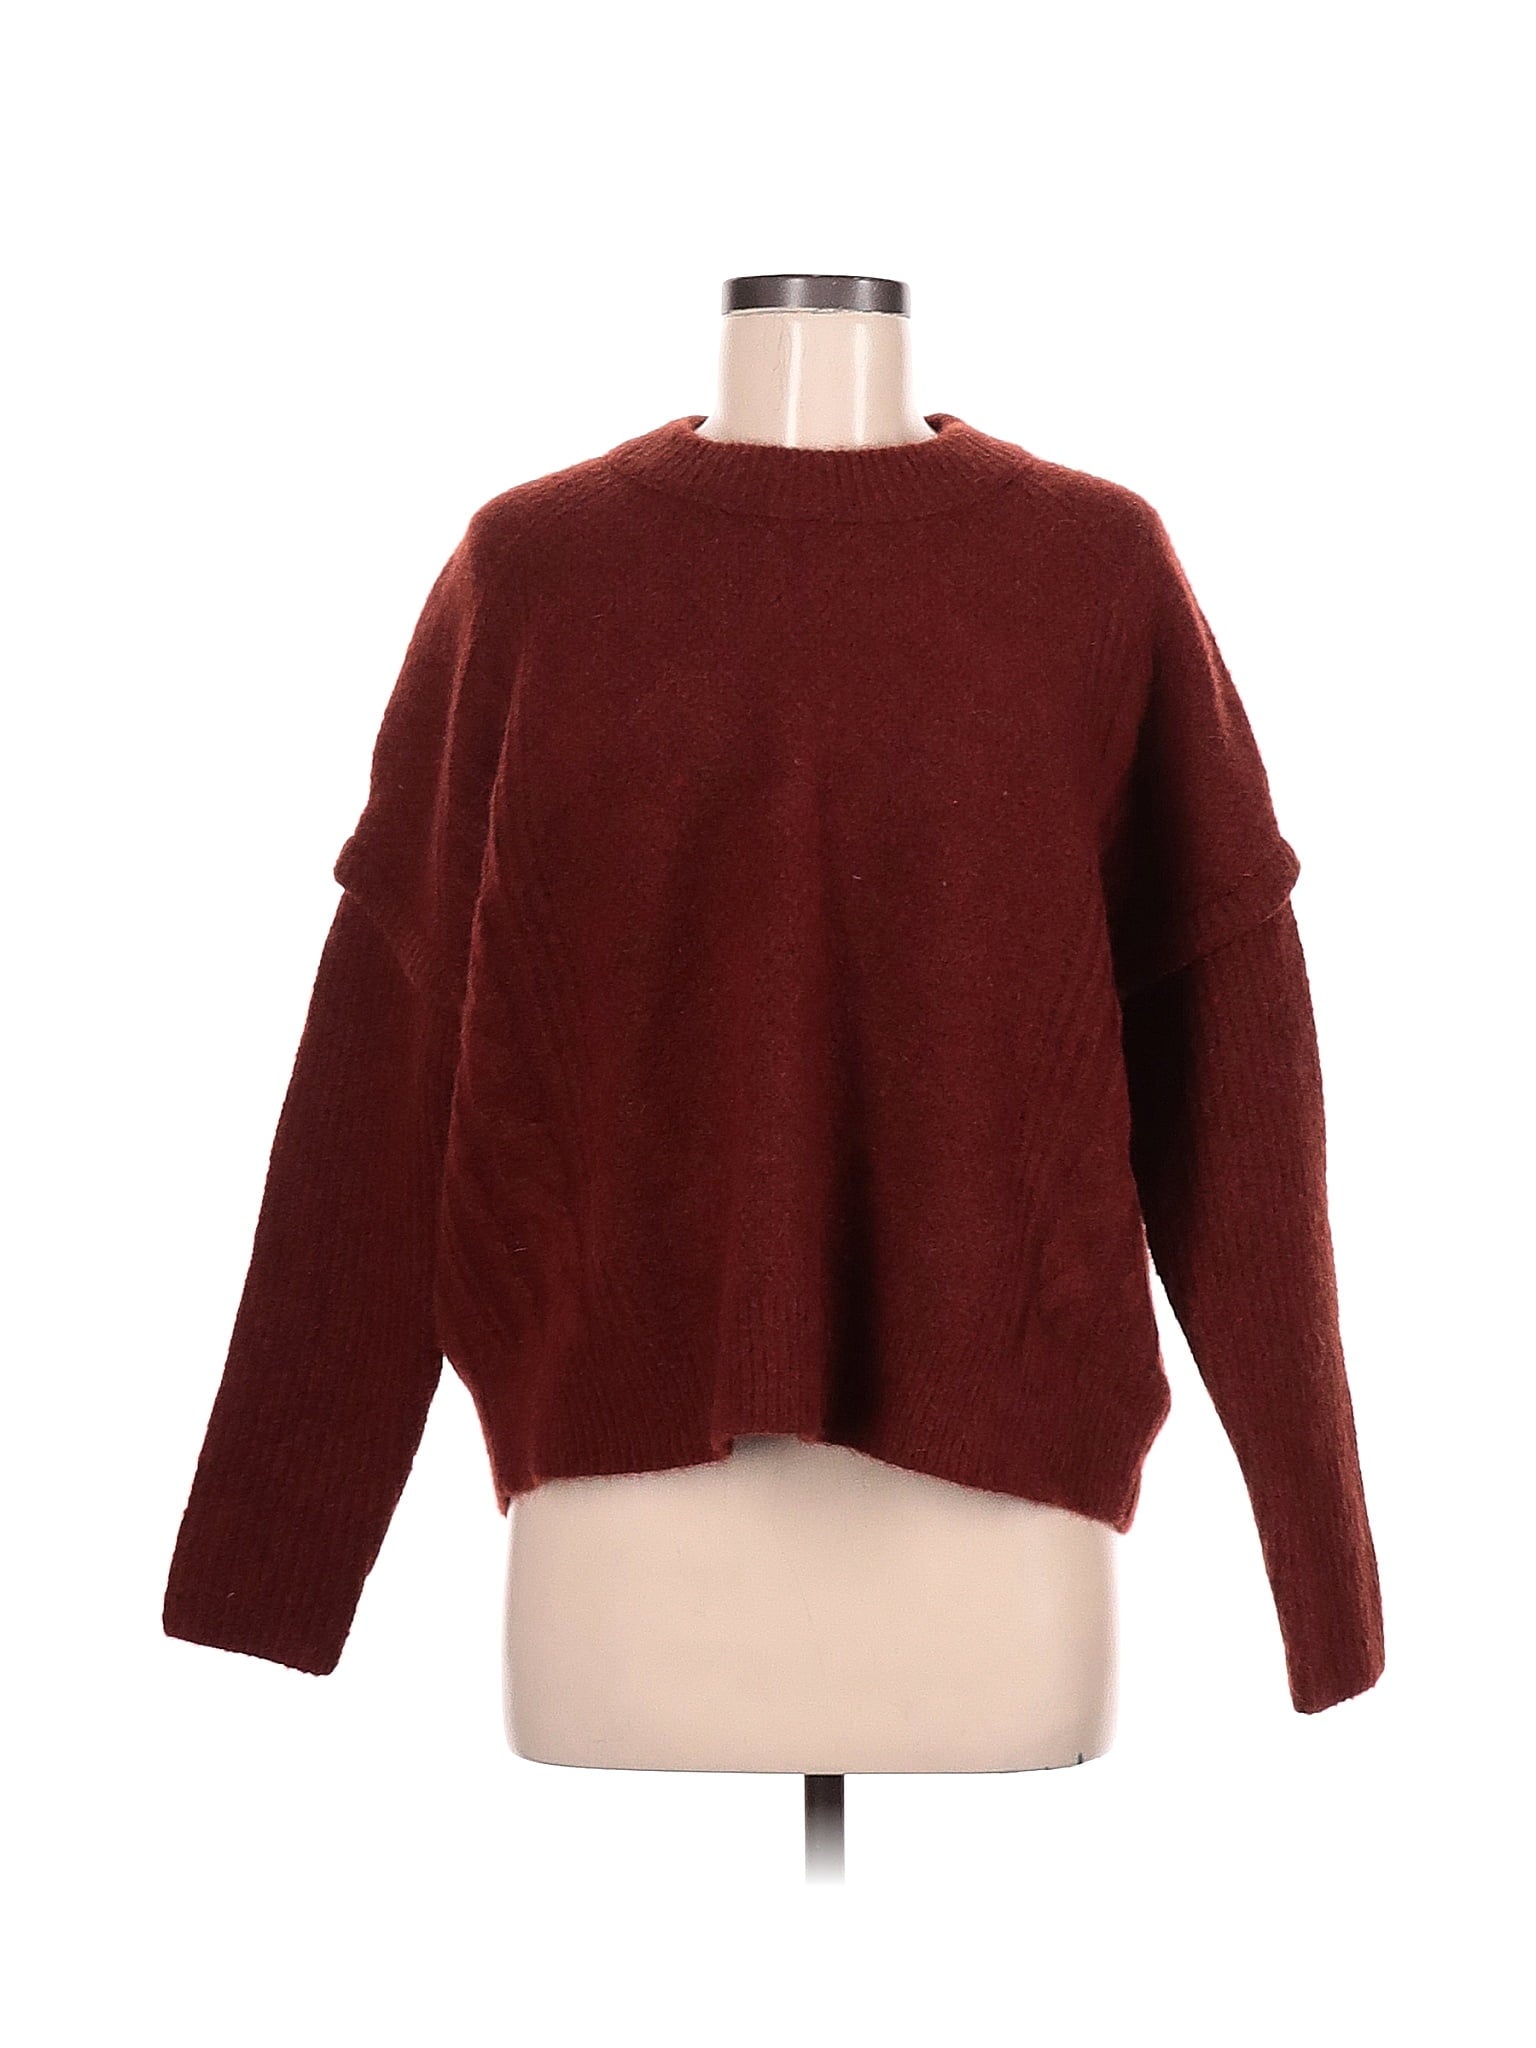 Pullover Sweater size - M